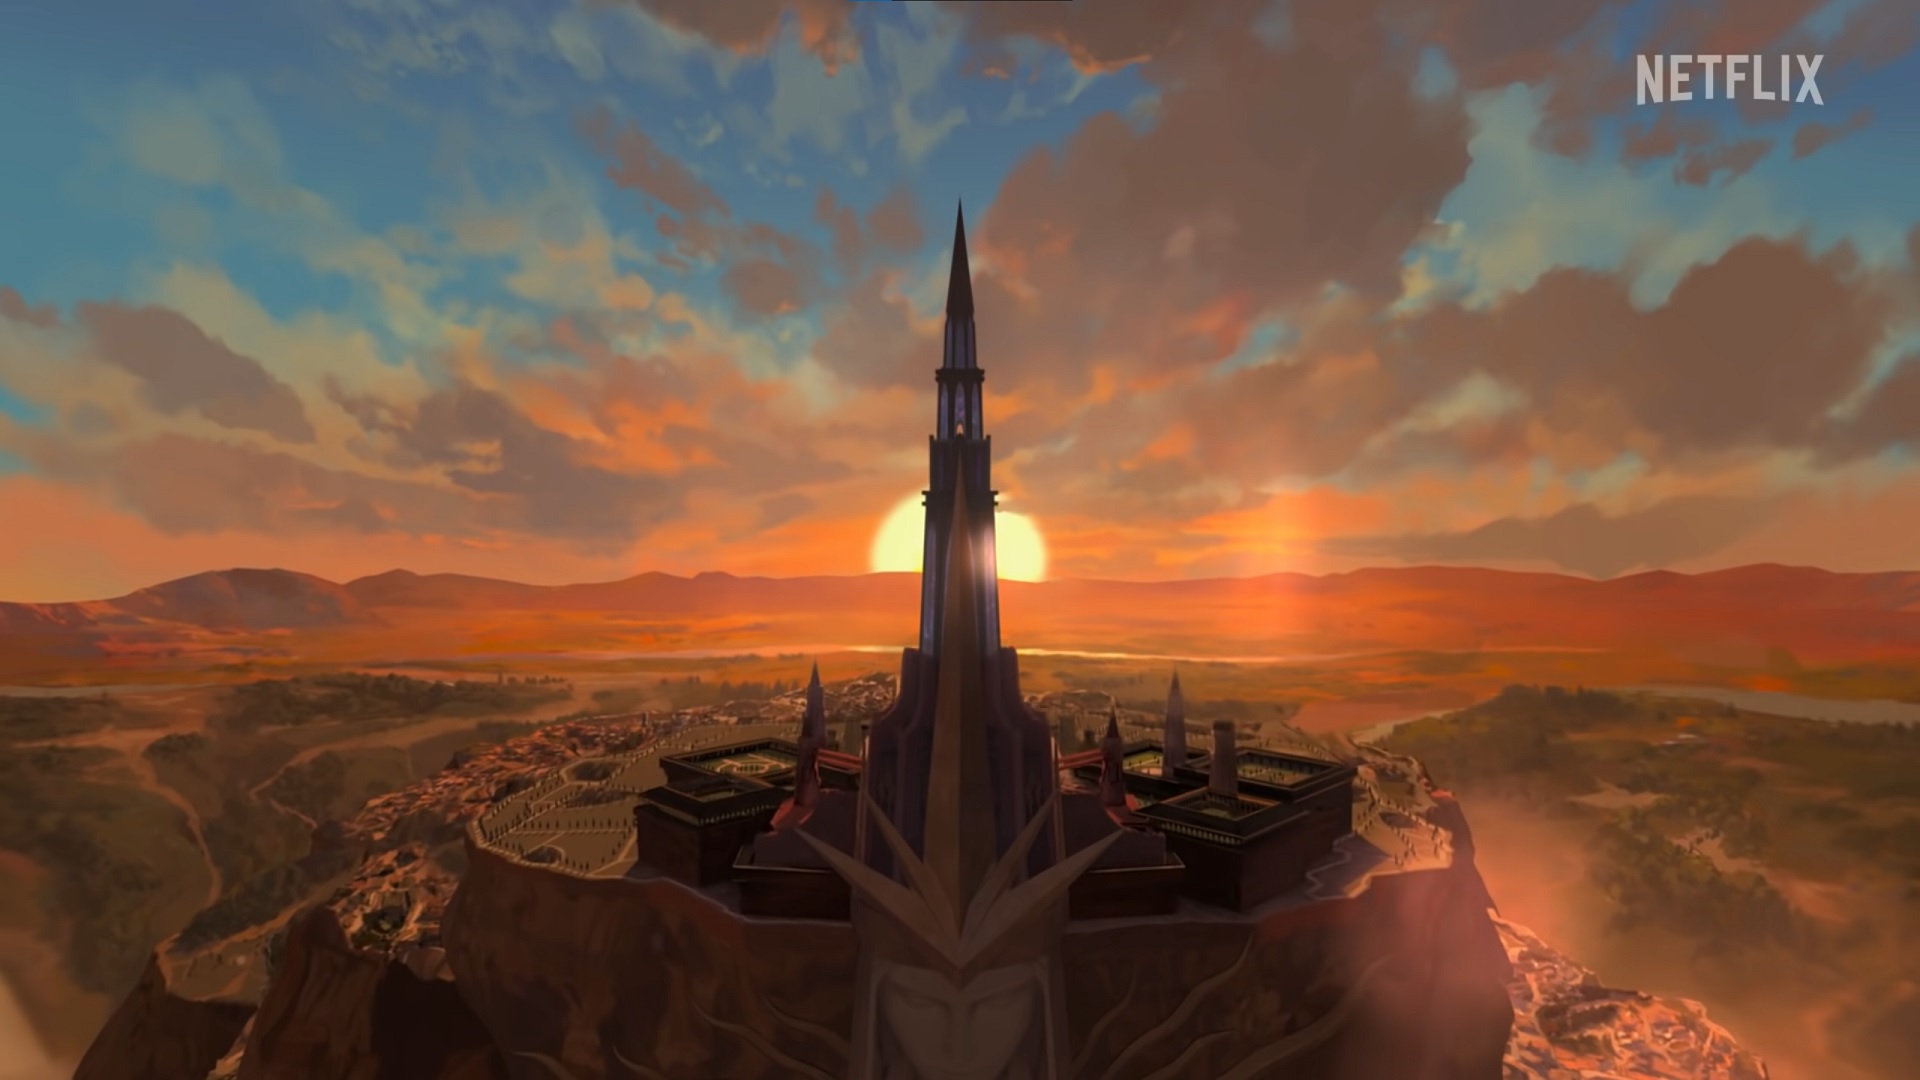 Dragon Age: Absolution teaser trailer - A sunset behind the spire of a tower overlooking a city on a mesa.